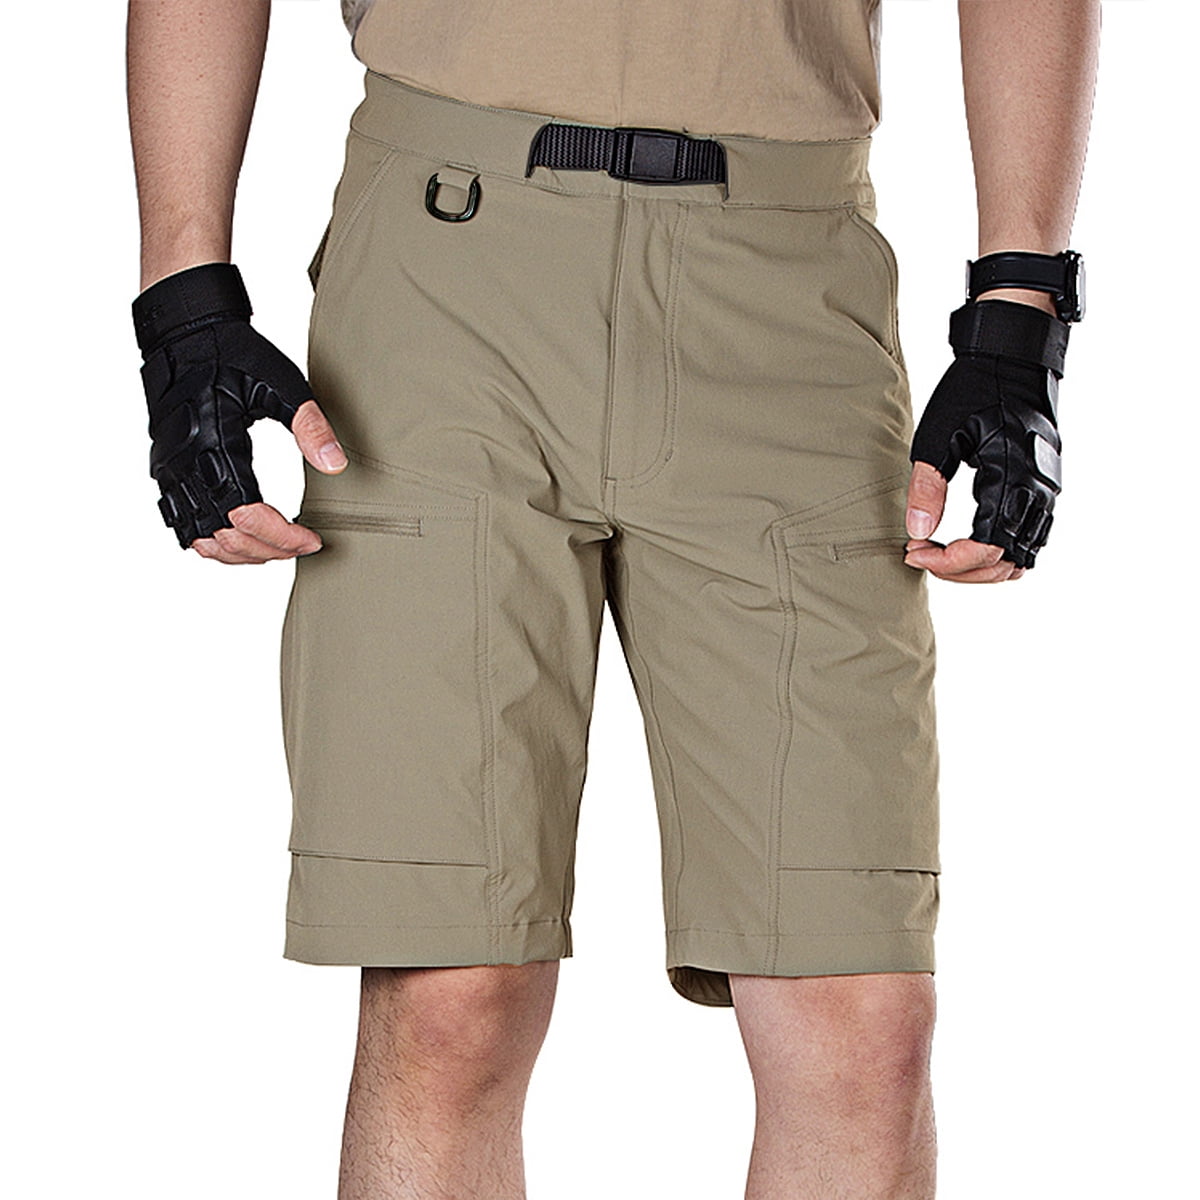 Tactical Cargo Workout Shorts for Men Quick Dry Outdoor Hiking Fishing Short Multi Pockets No Belt